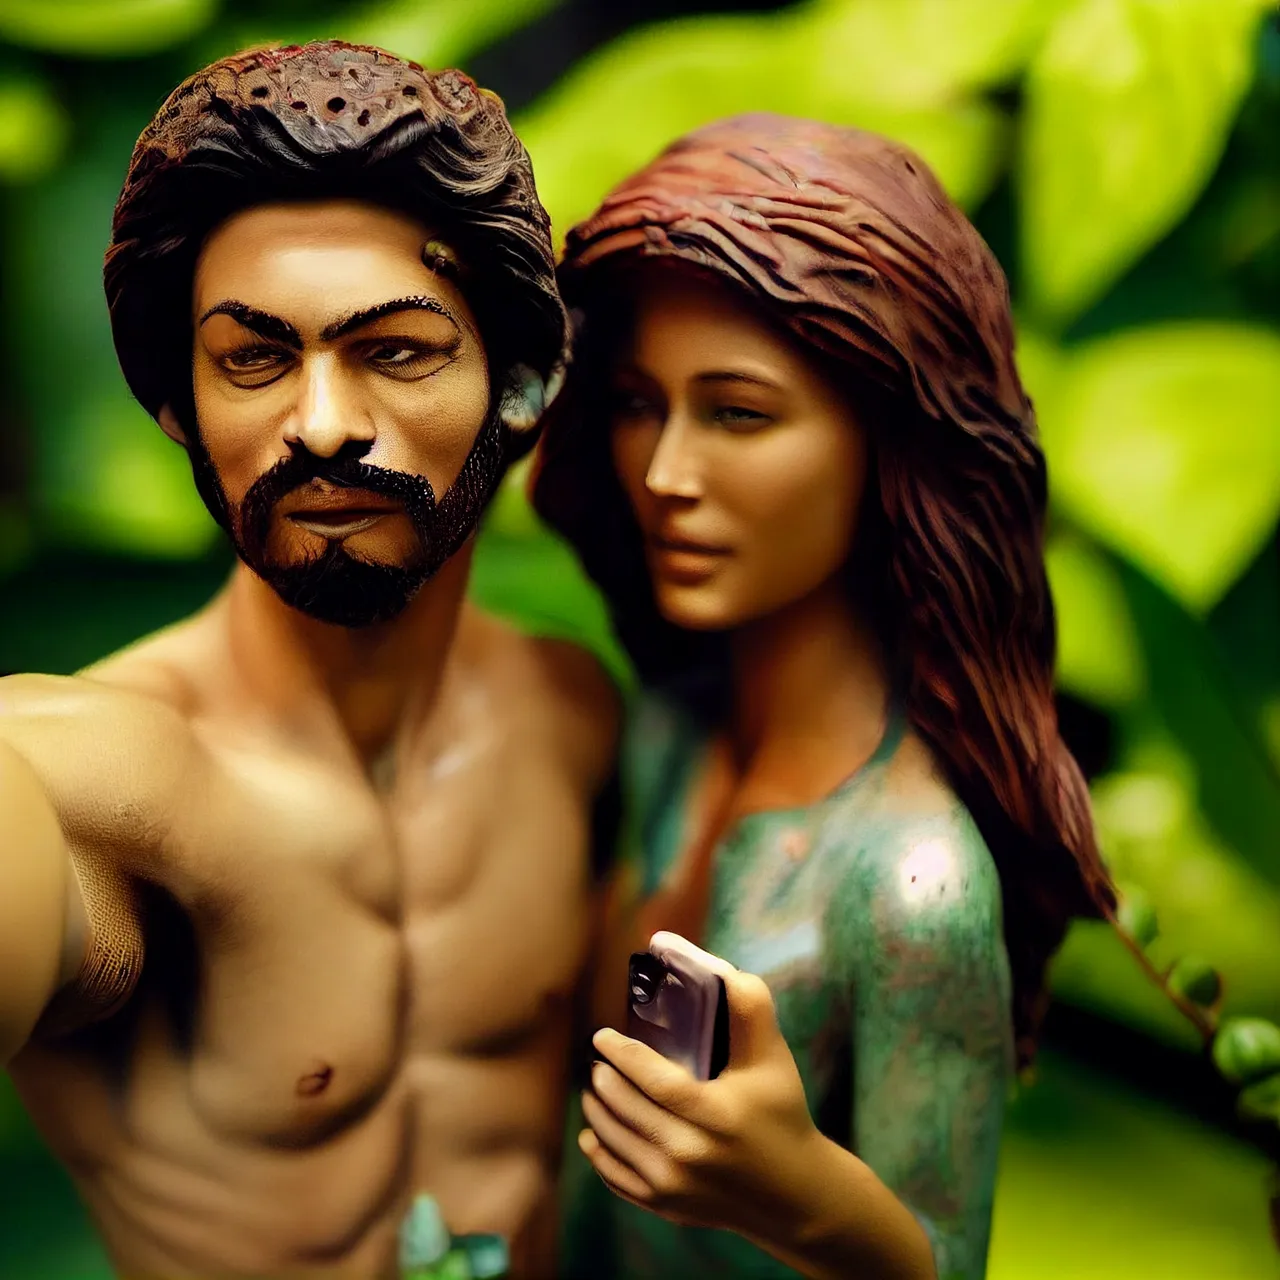 Ed_Privat_Adam_and_Eve_are_taking_a_Selfie_in_the_garden_of_Ede_49282df3-2715-429c-a7e5-3548cfaef1d9.png